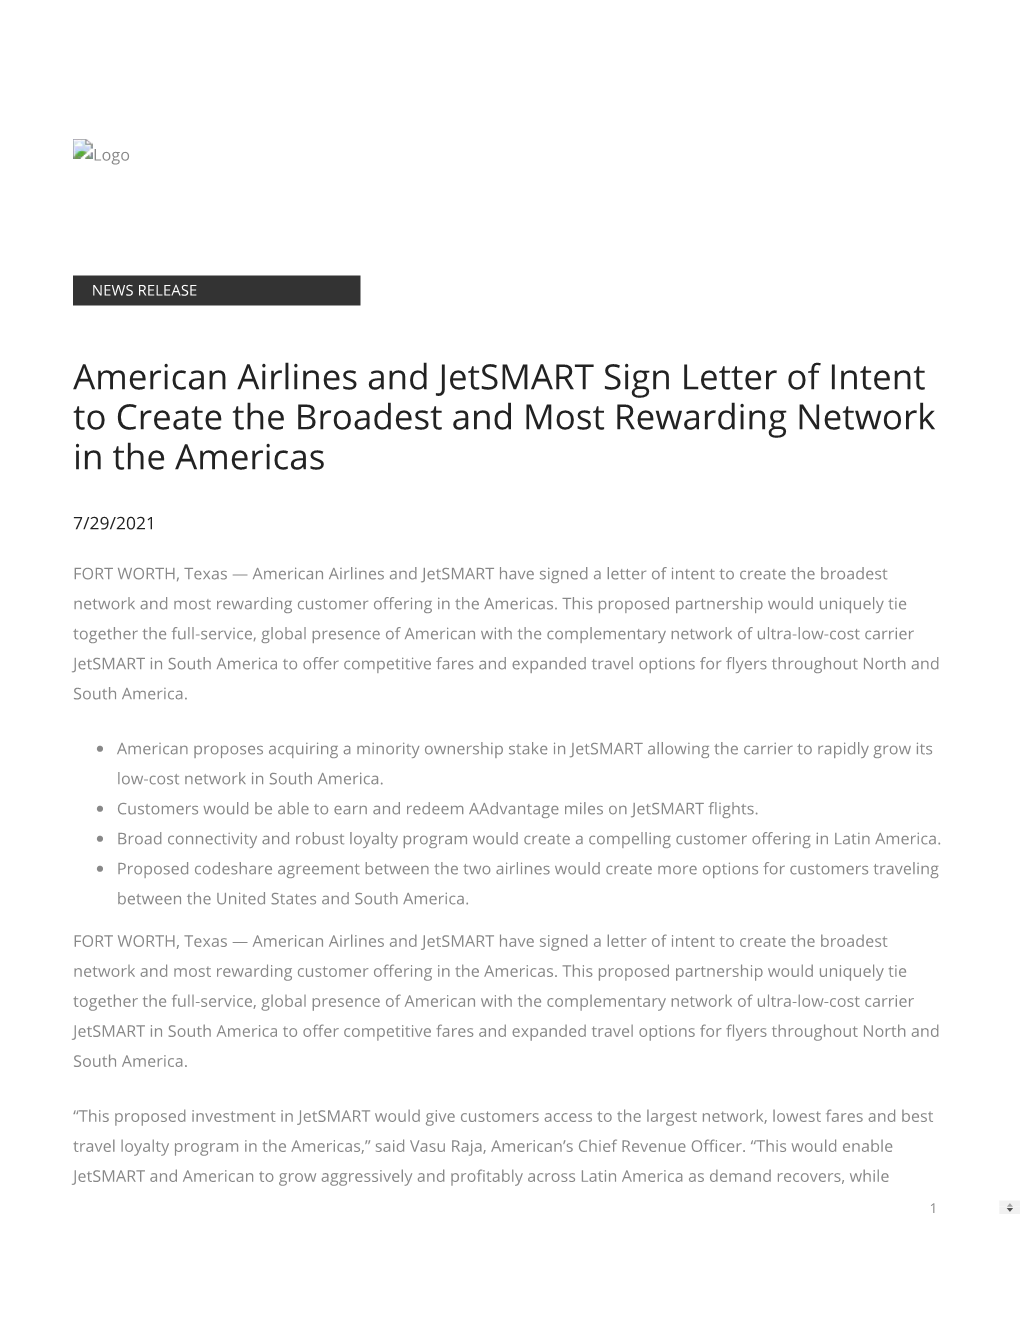 American Airlines and Jetsmart Sign Letter of Intent to Create the Broadest and Most Rewarding Network in the Americas